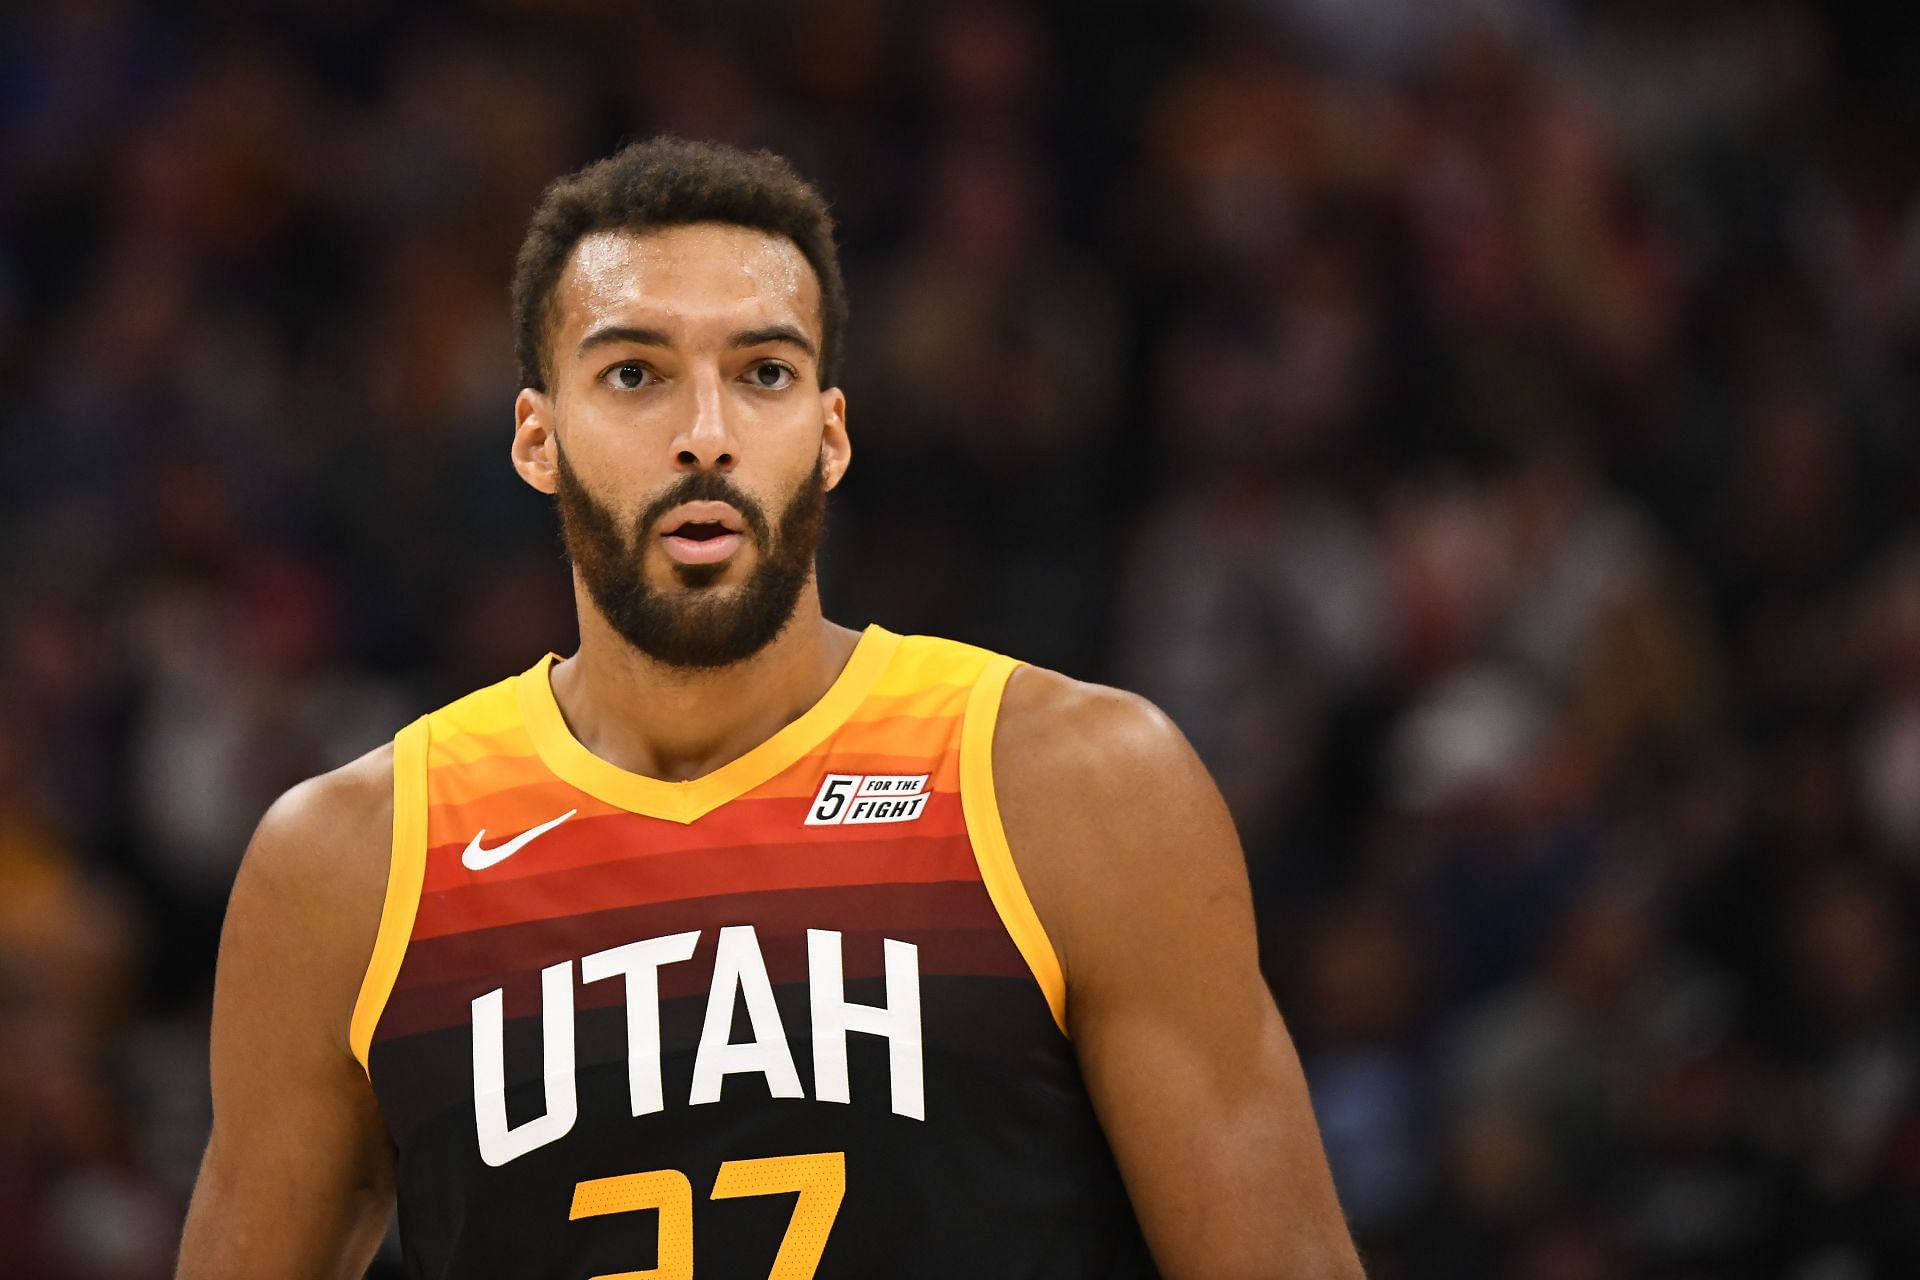 Rudy Gobert was traded by the Utah Jazz.